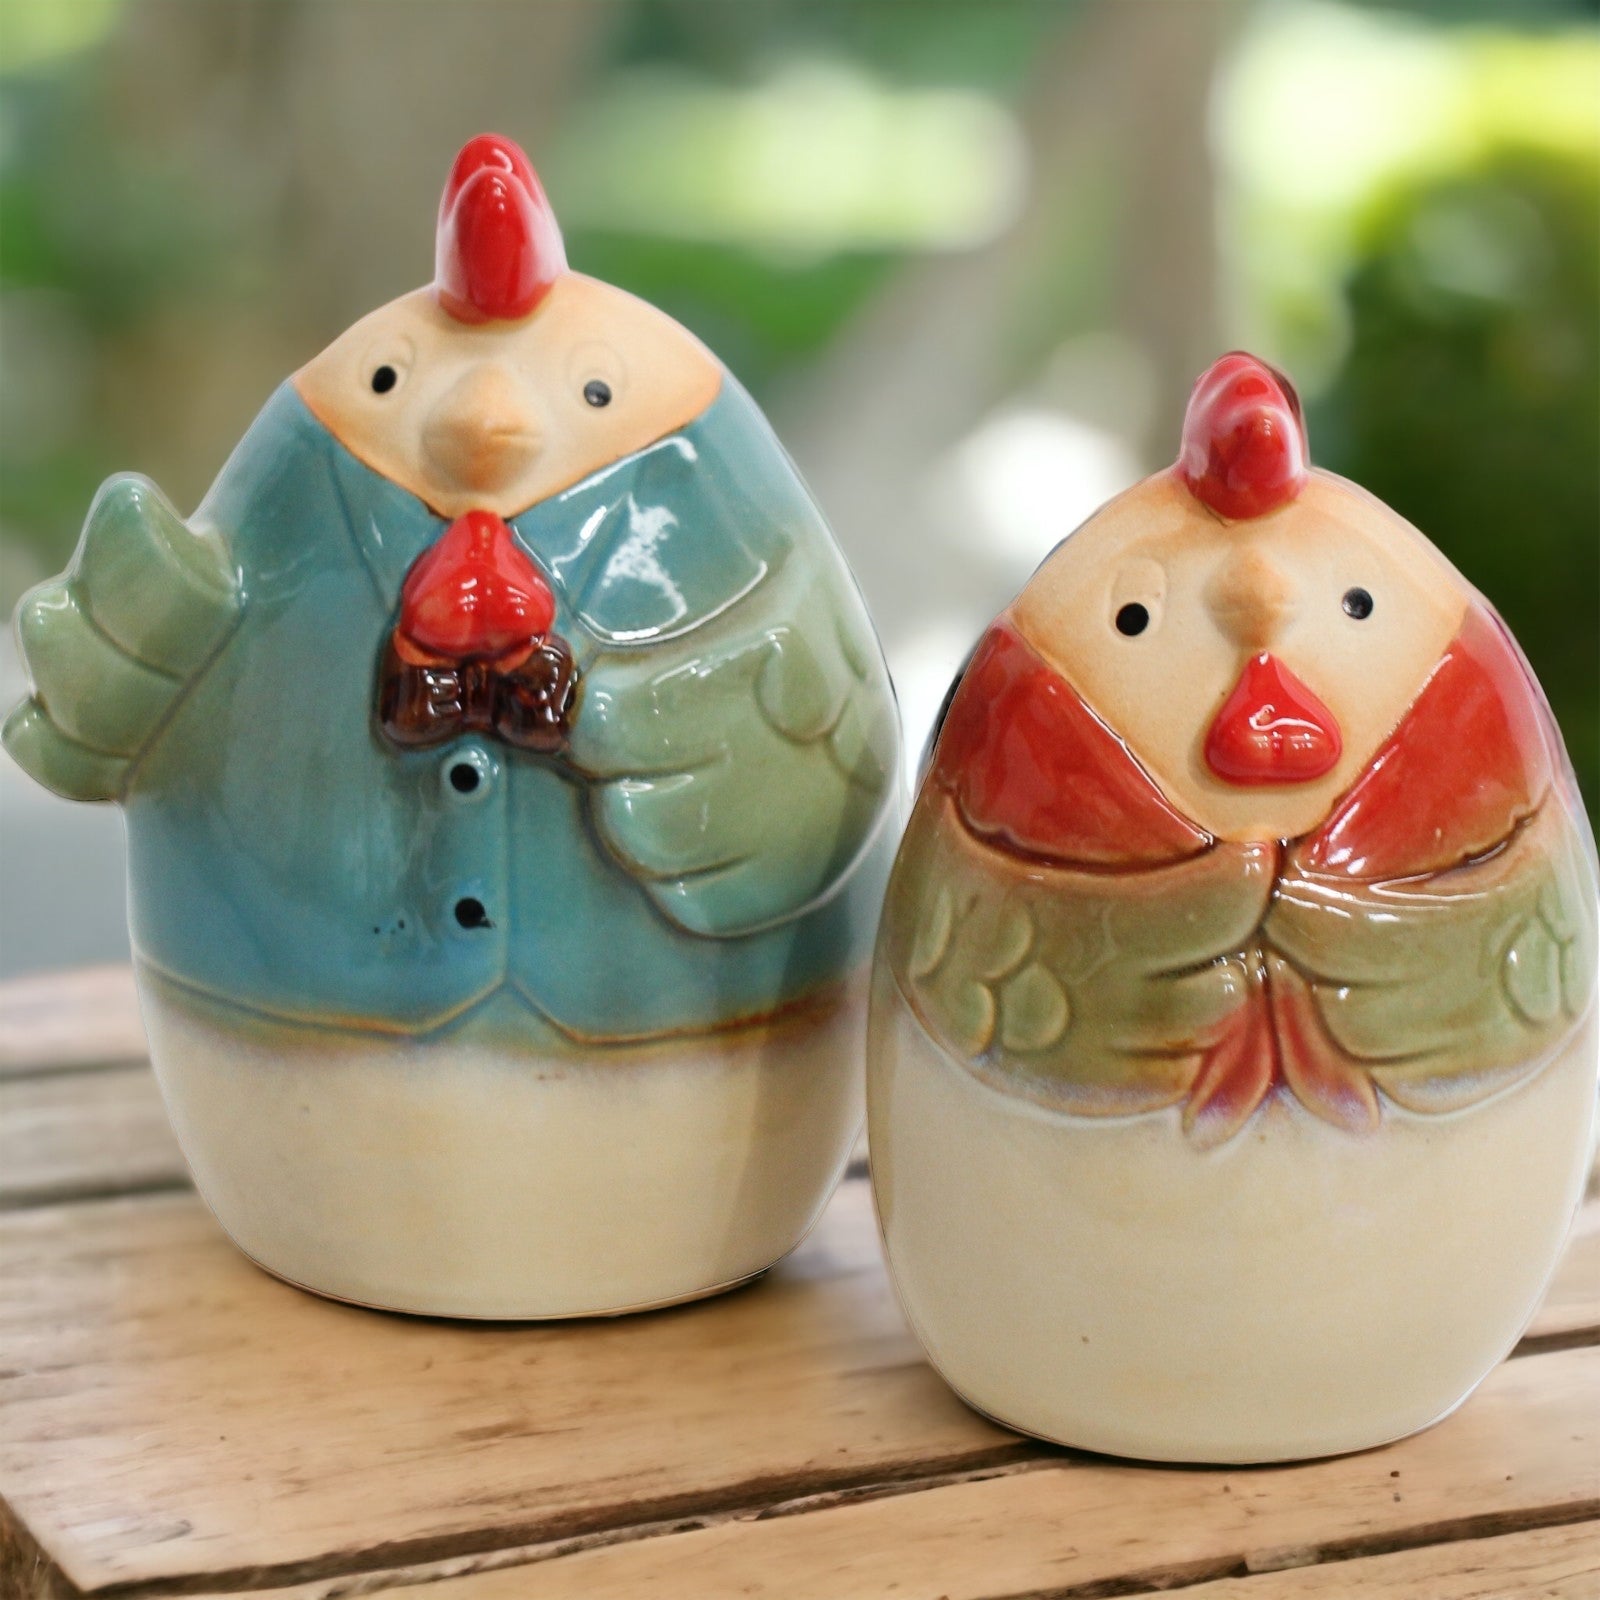 Chicken and Rooster Ornament - The Renmy Store Homewares & Gifts 